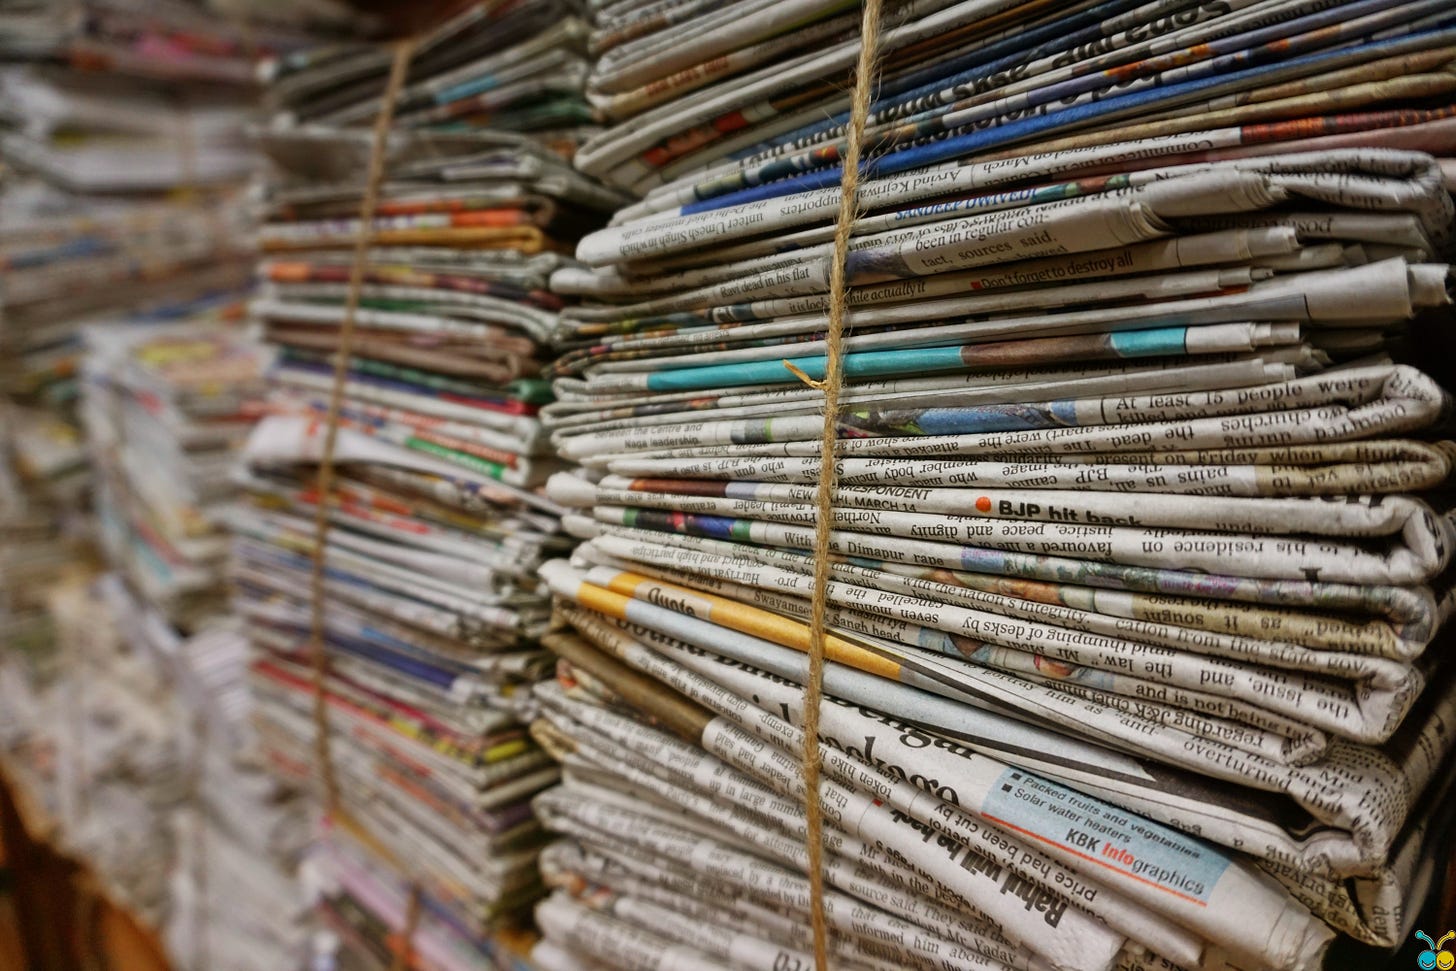 Tall stacks of newspapers